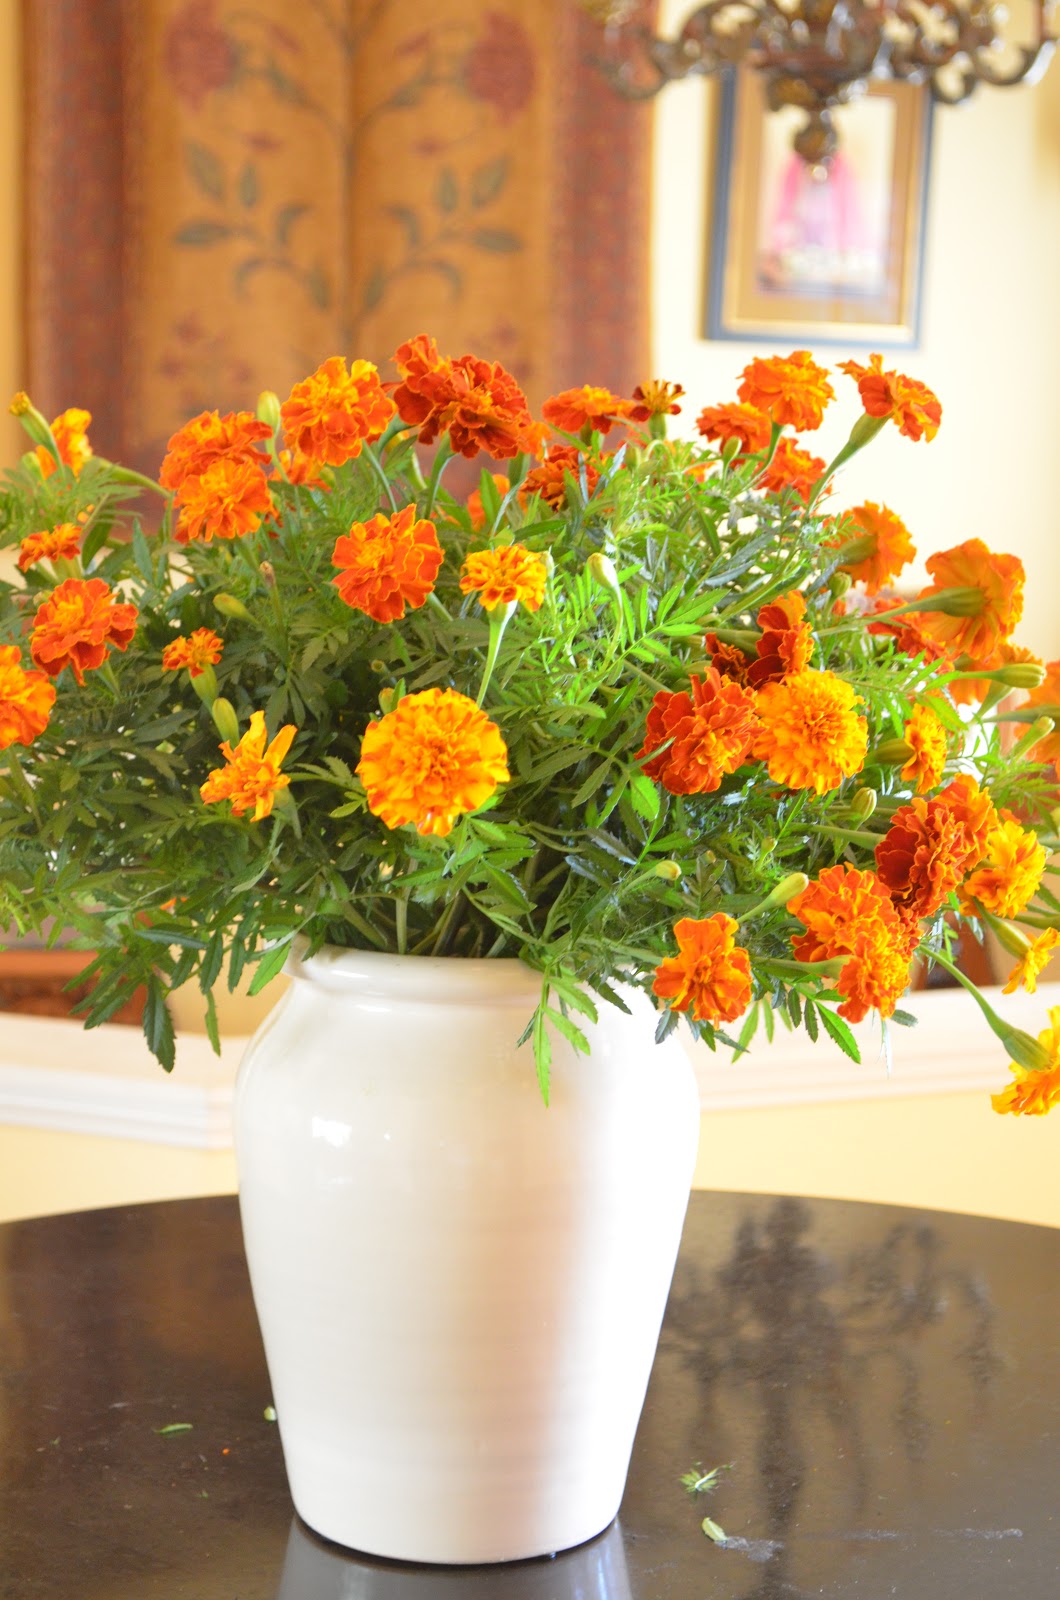 Entertaining From an Ethnic Indian Kitchen: Designing with marigolds